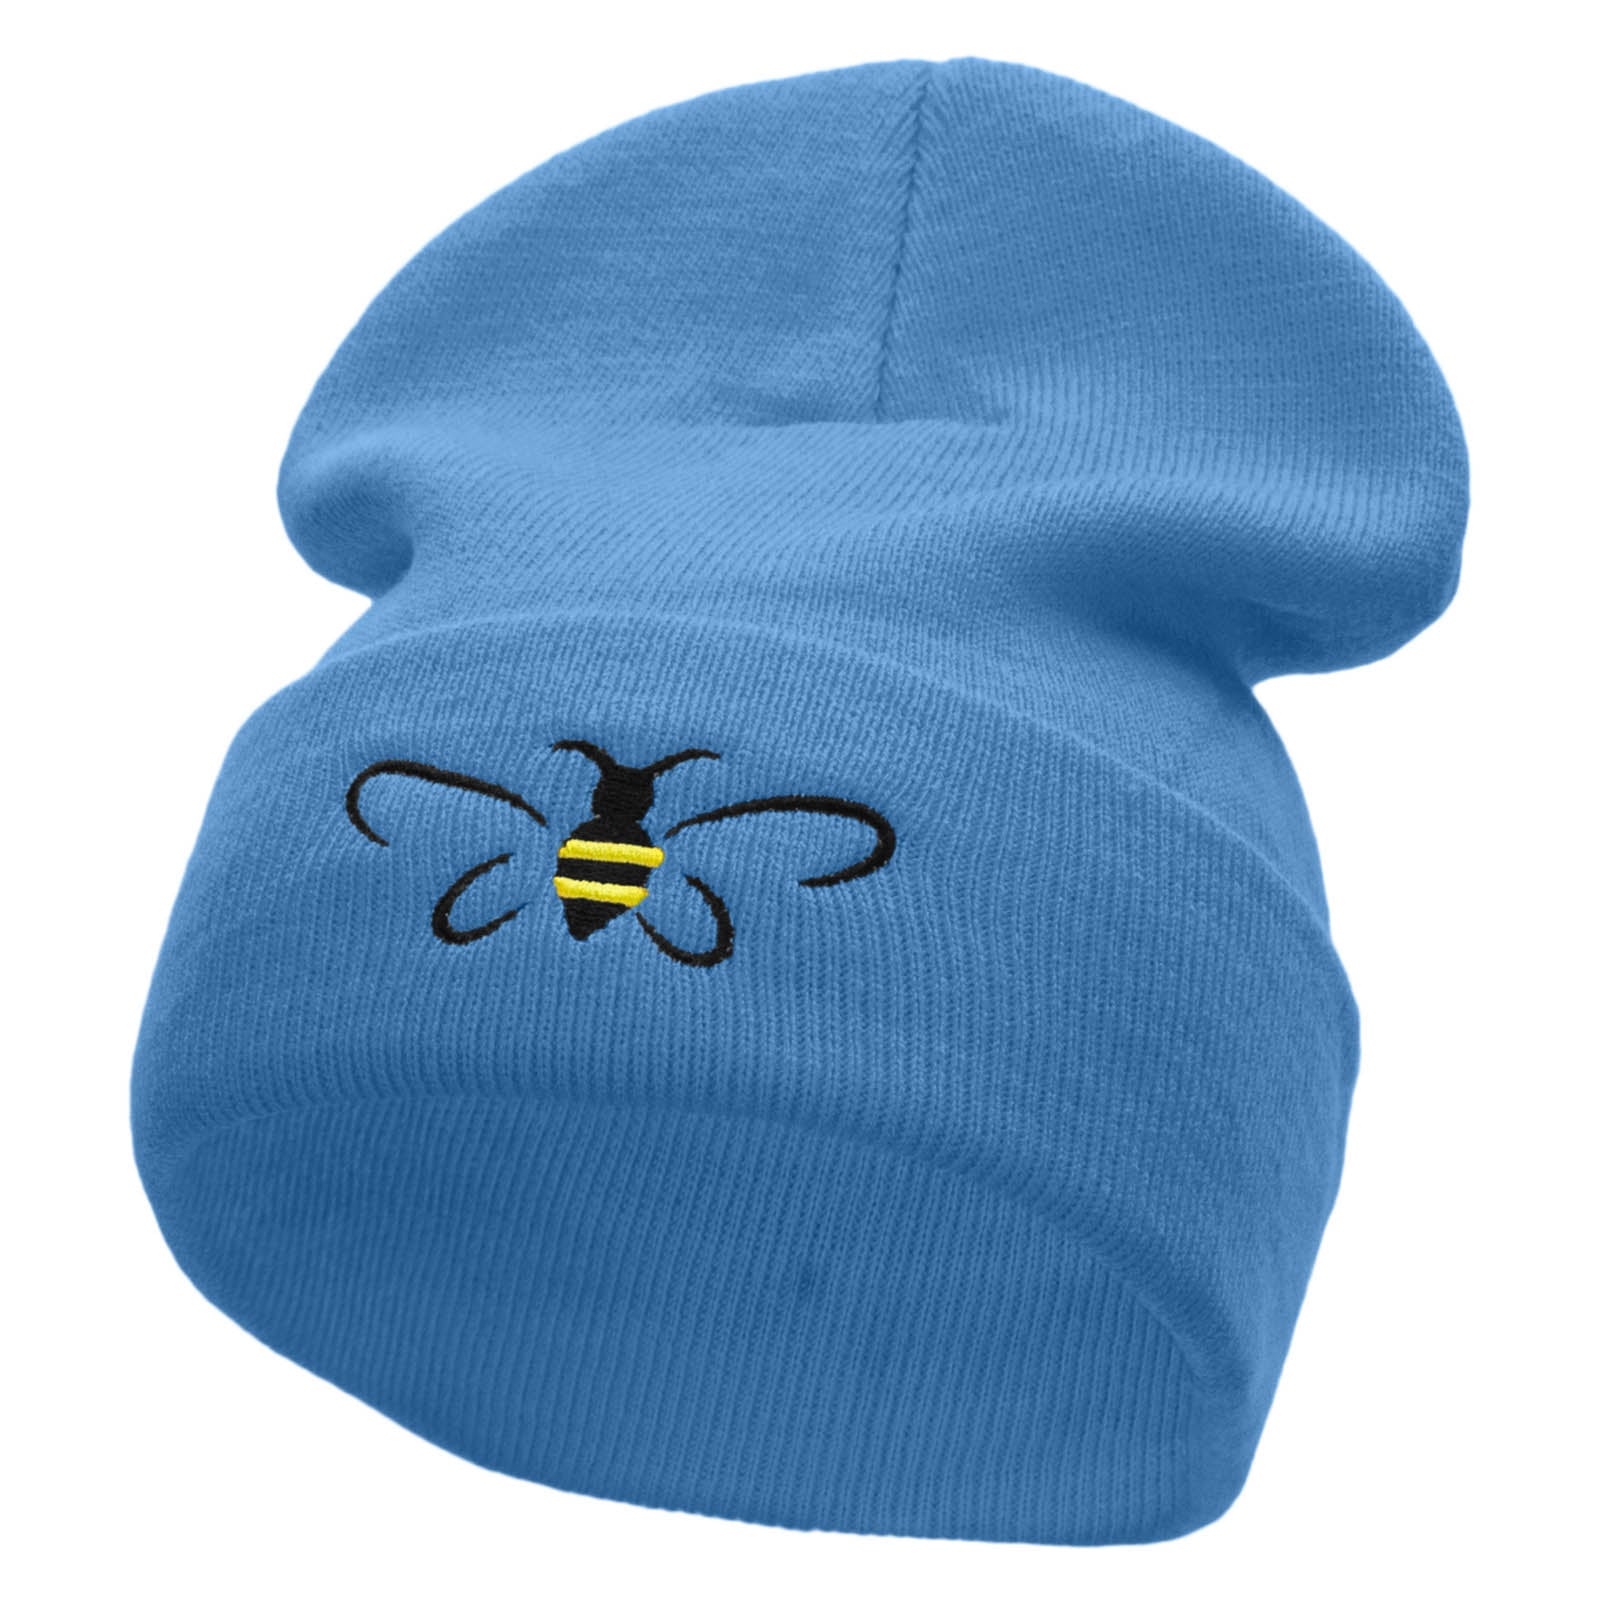 Bee Embroidered 12 Inch Long Knitted Beanie - Sky Blue OSFM